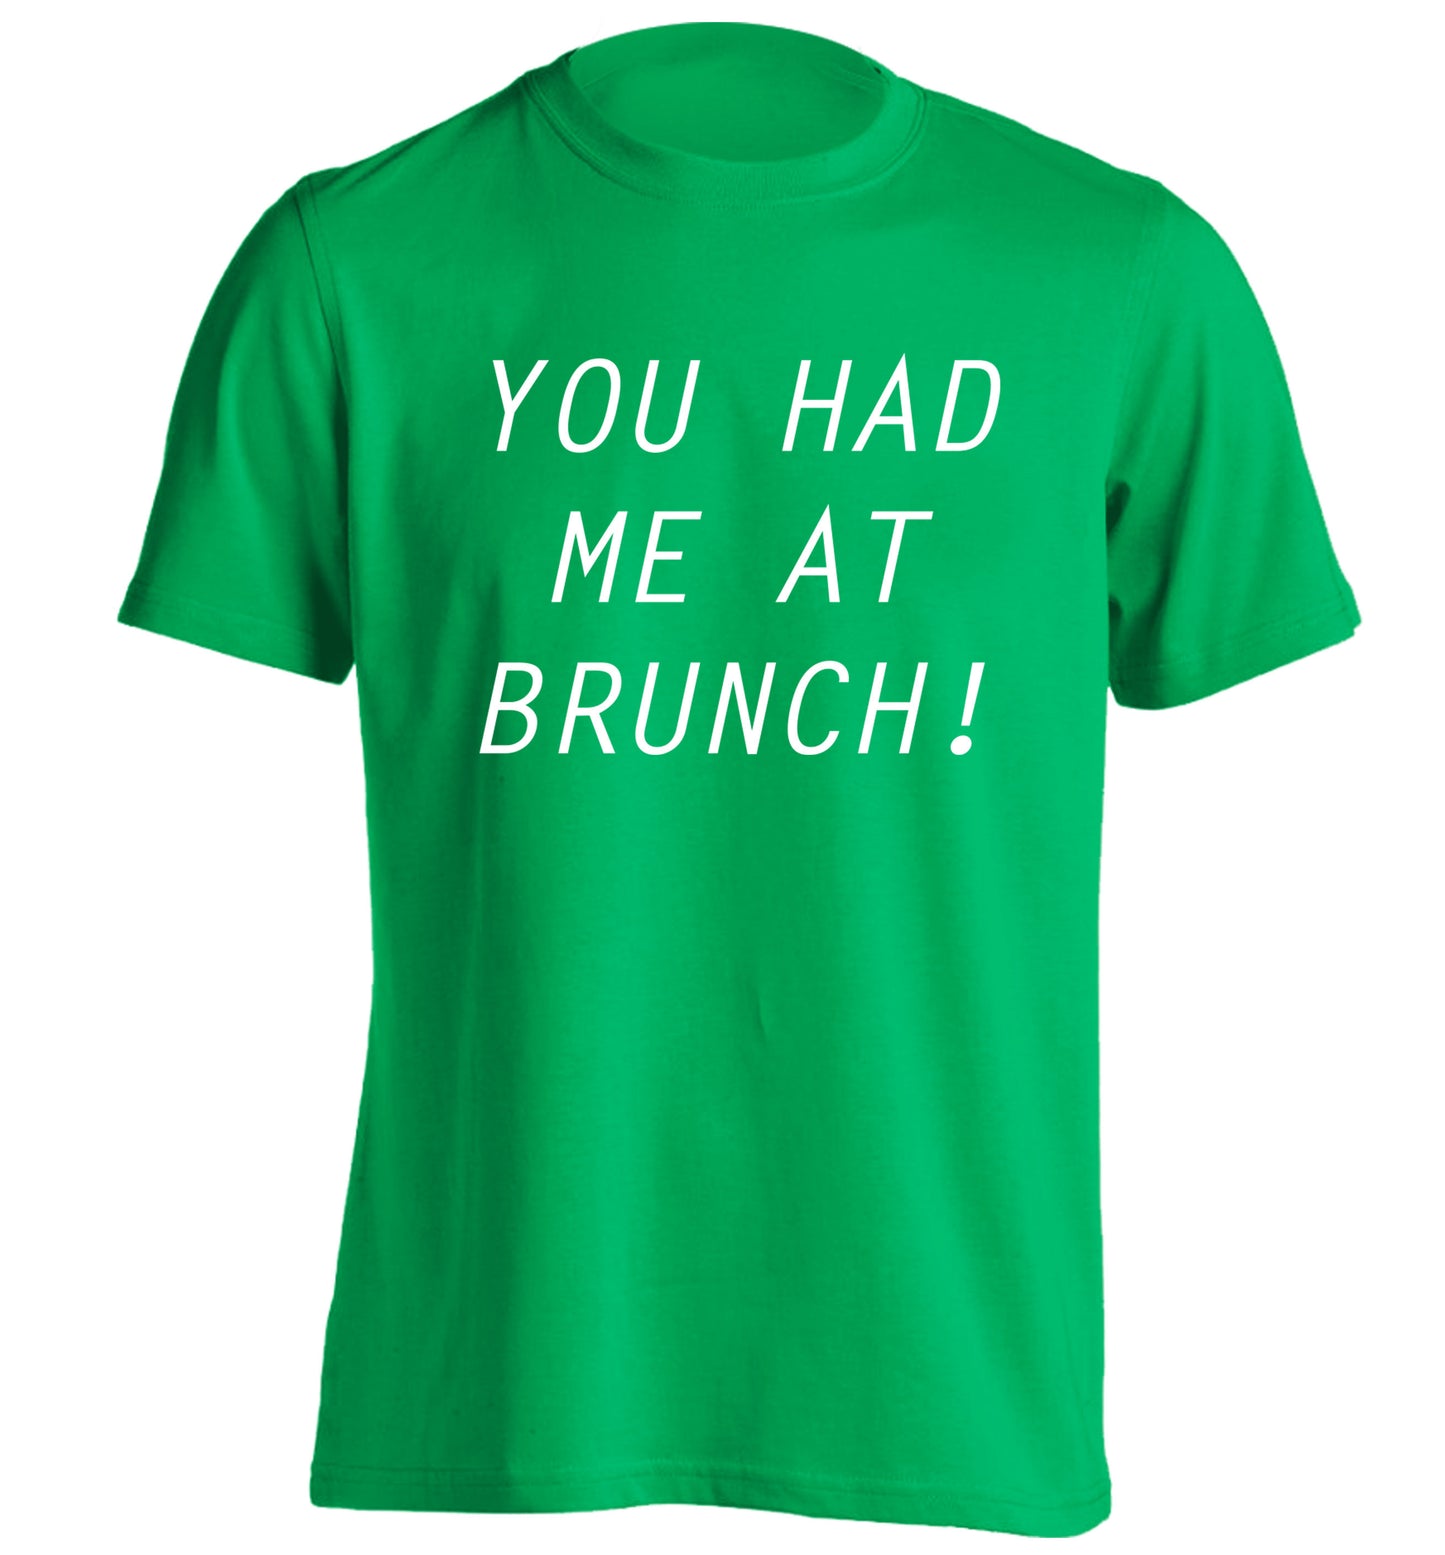 You had me at brunch adults unisex green Tshirt 2XL